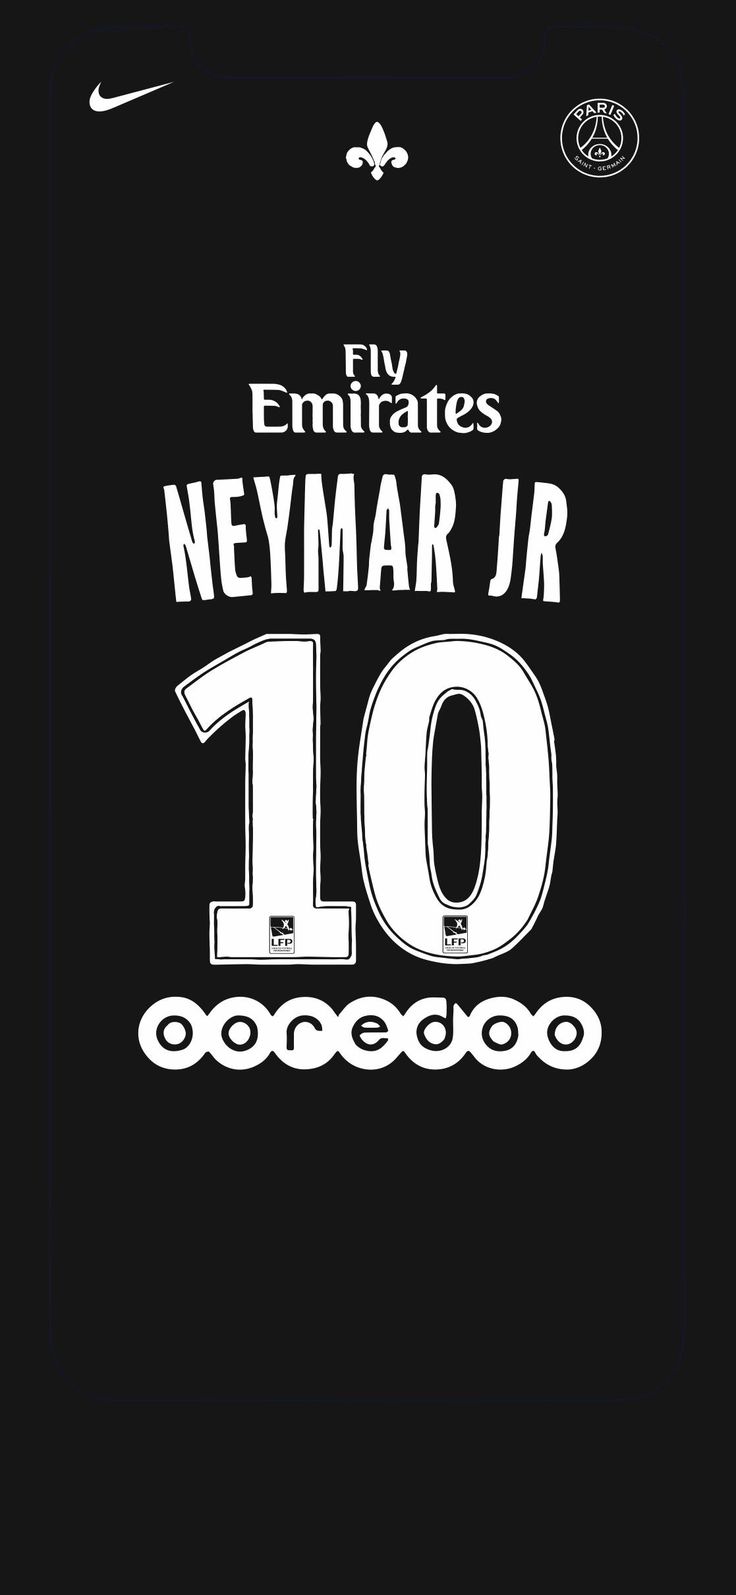 Neymar Jr Wallpaper HD, We have a massive amount of HD image that will make your computer or smartphone look absolutely fresh